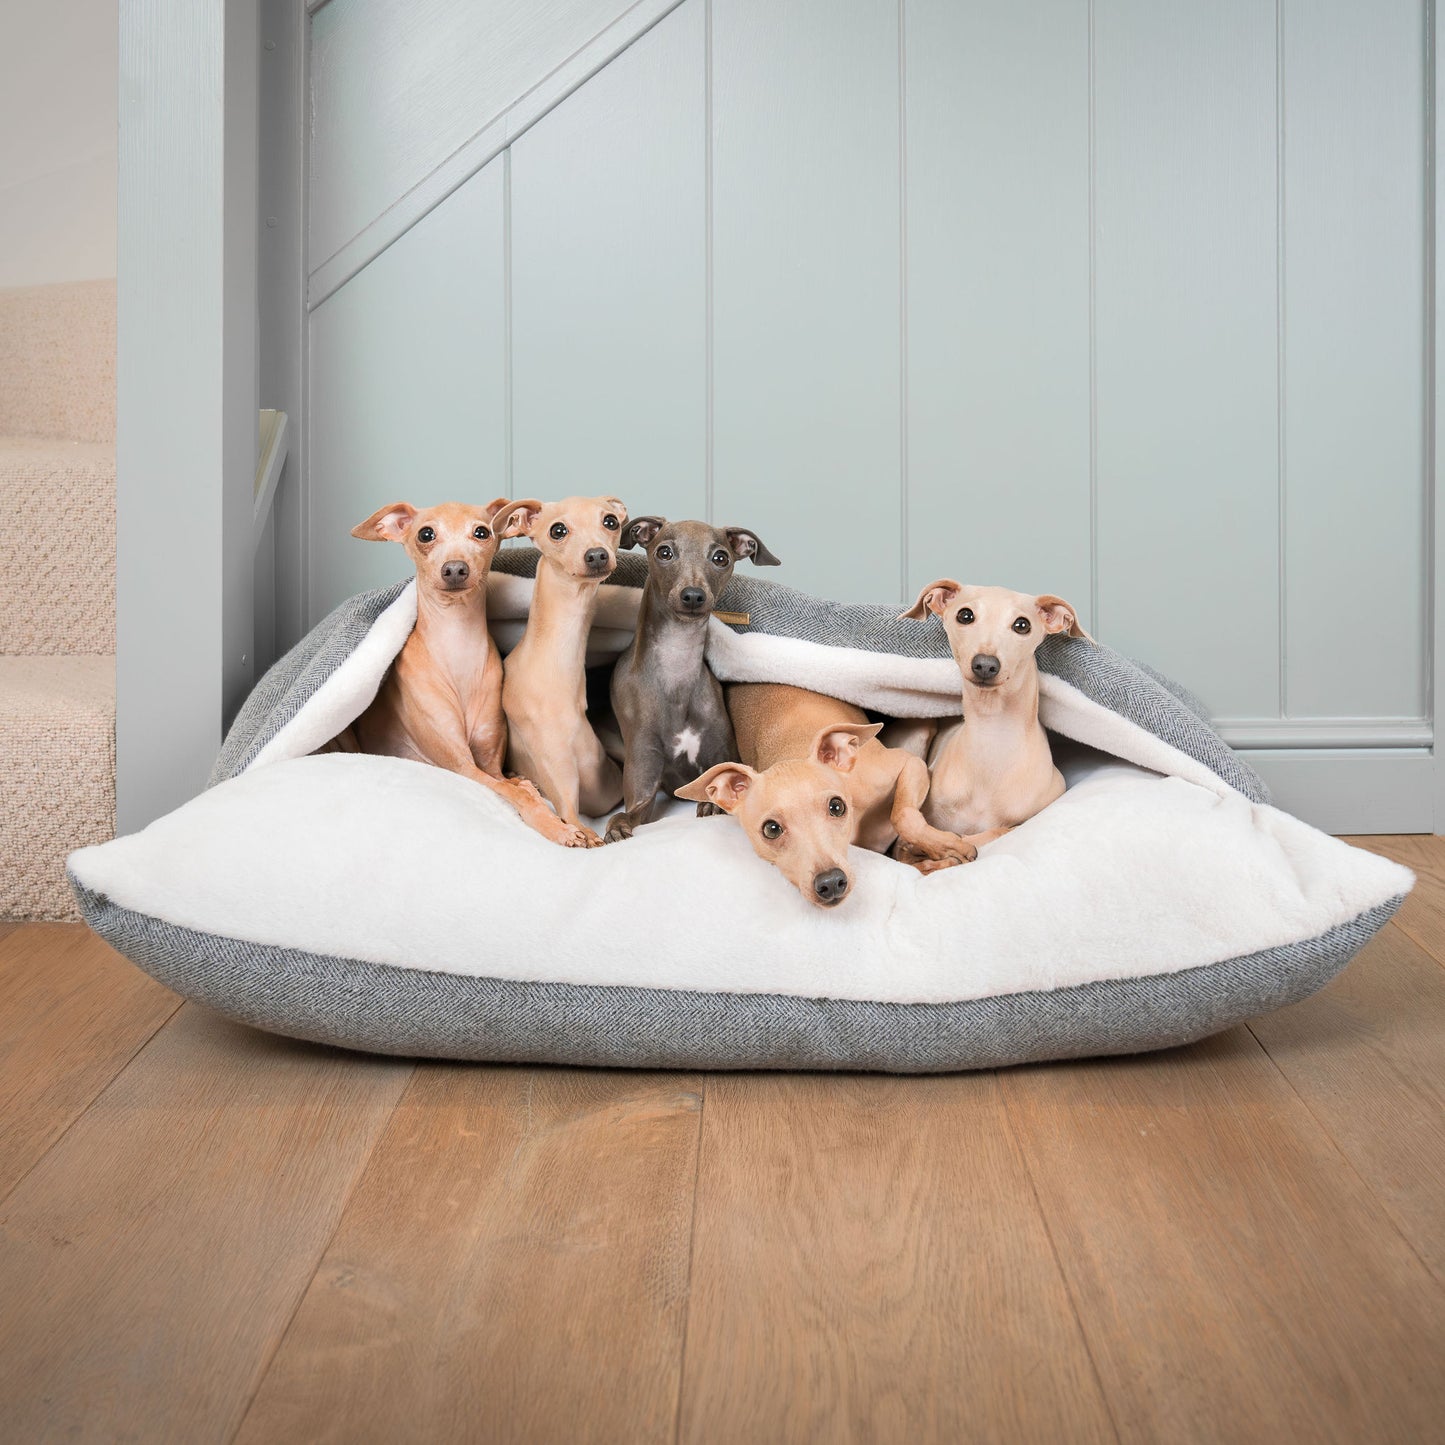 Discover The Perfect Burrow For Your Pet, Our Stunning Sleepy Burrow Dog Beds In Pewter Herringbone Is The Perfect Bed Choice For Your Pet, Available Now at Lords & Labradors US